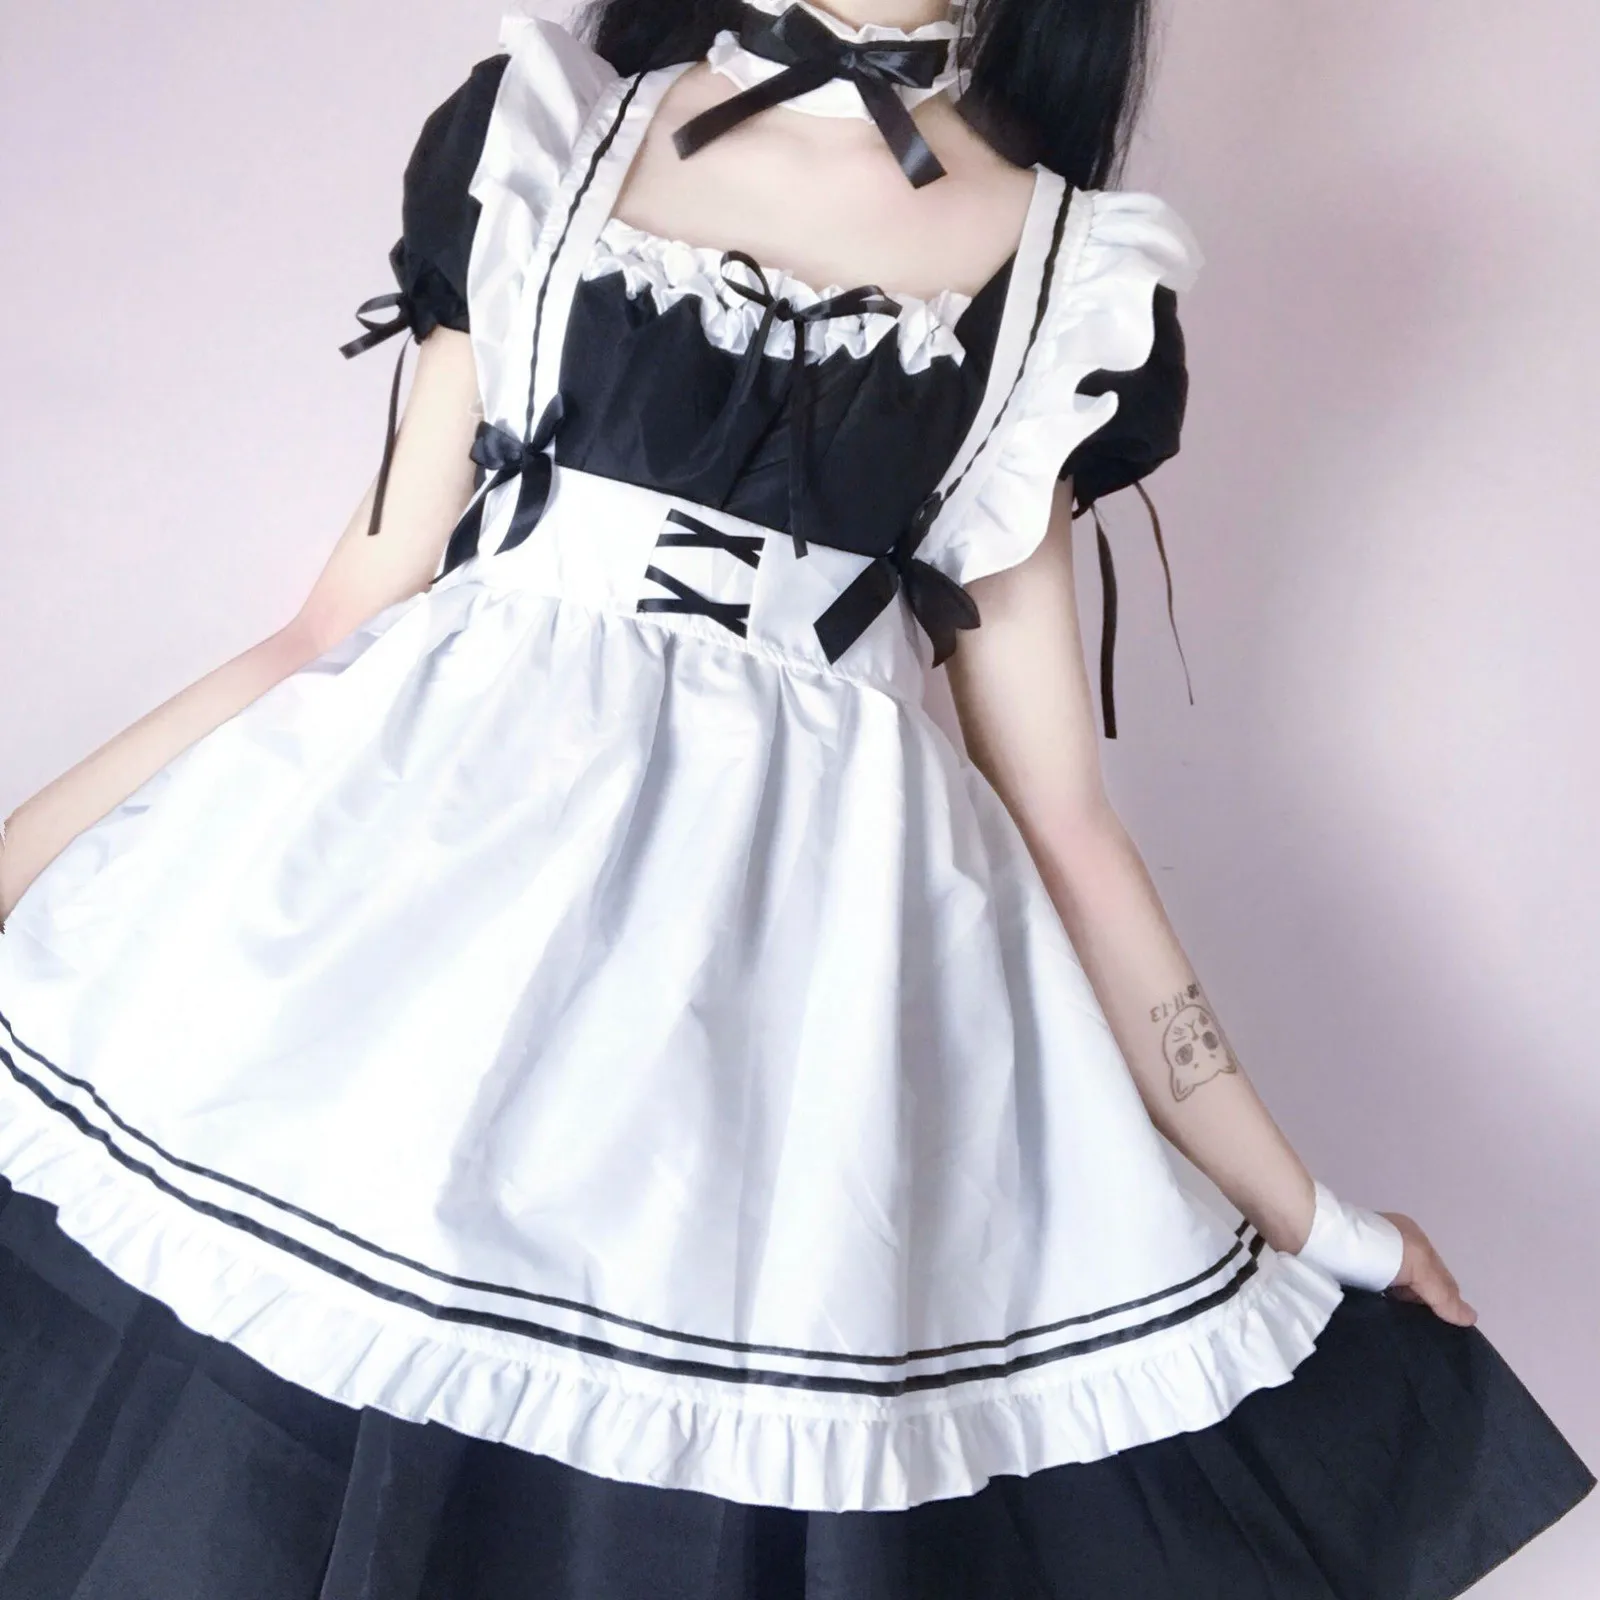 

2021 Black Cute Lolita Maid Costumes Girls Women Lovely Maid Cosplay Costume Animation Show Japanese Outfit Dress Clothes